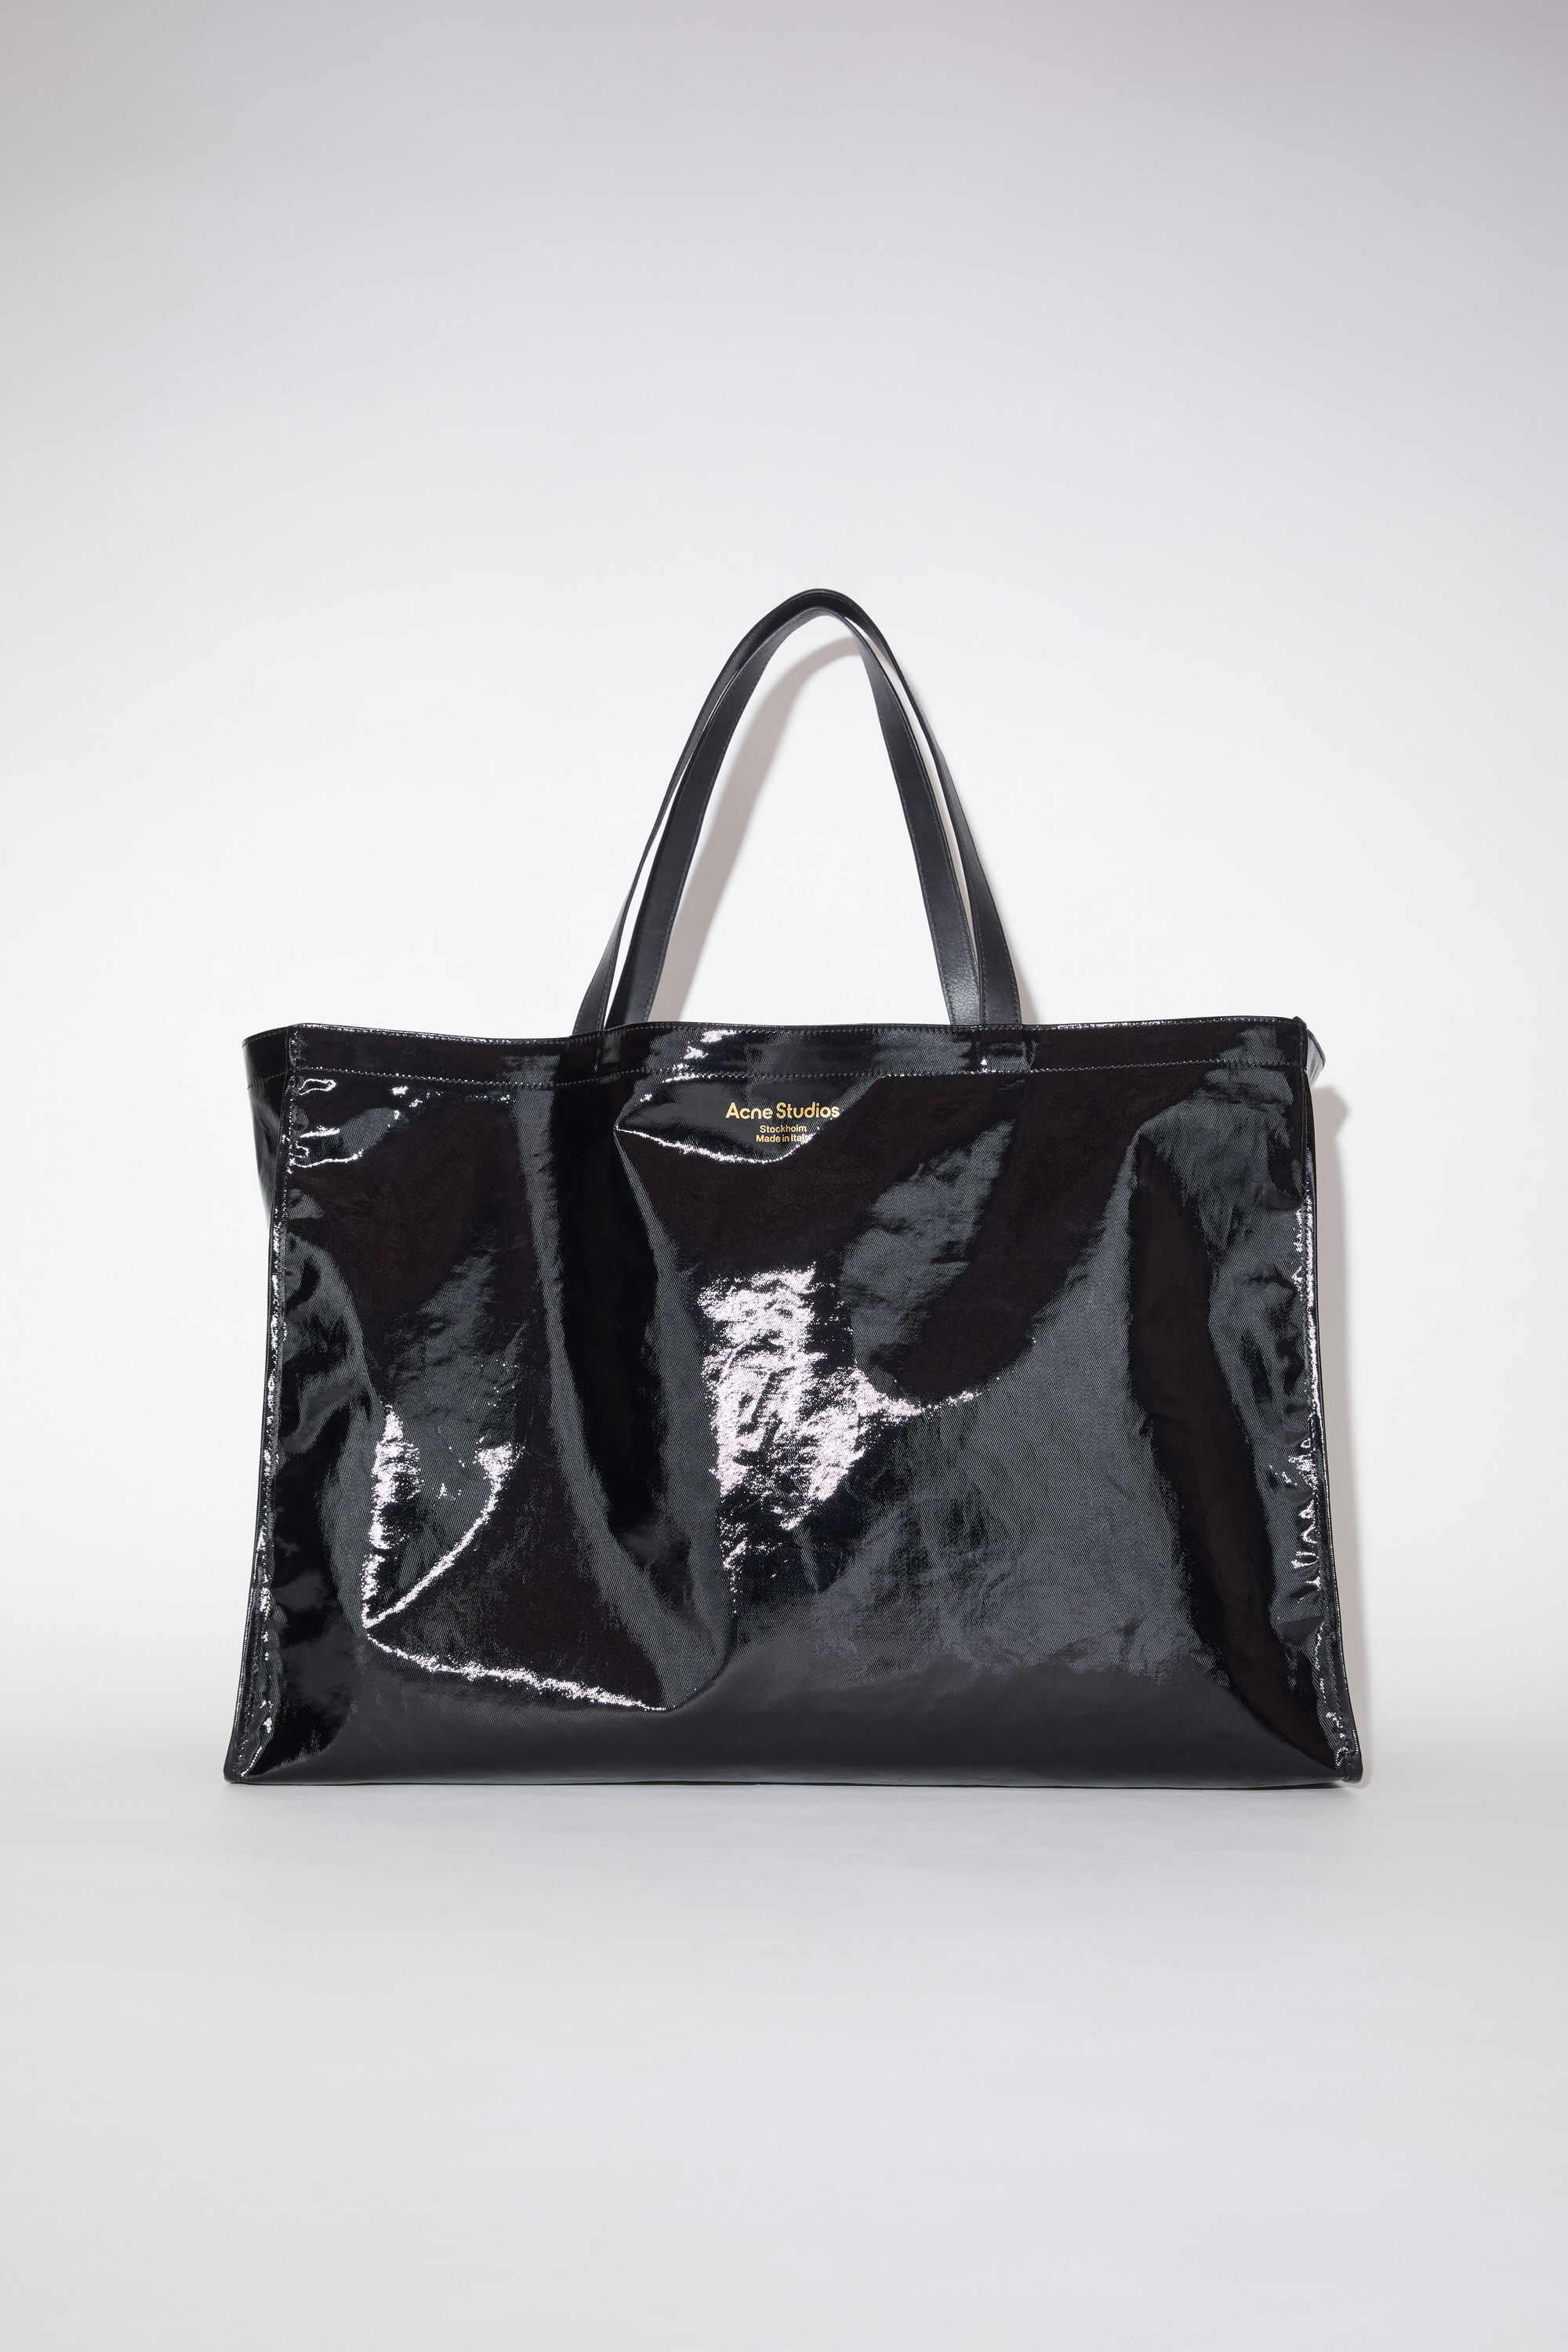 LEATHER EASTWEST TOTEBAG トートバッグ